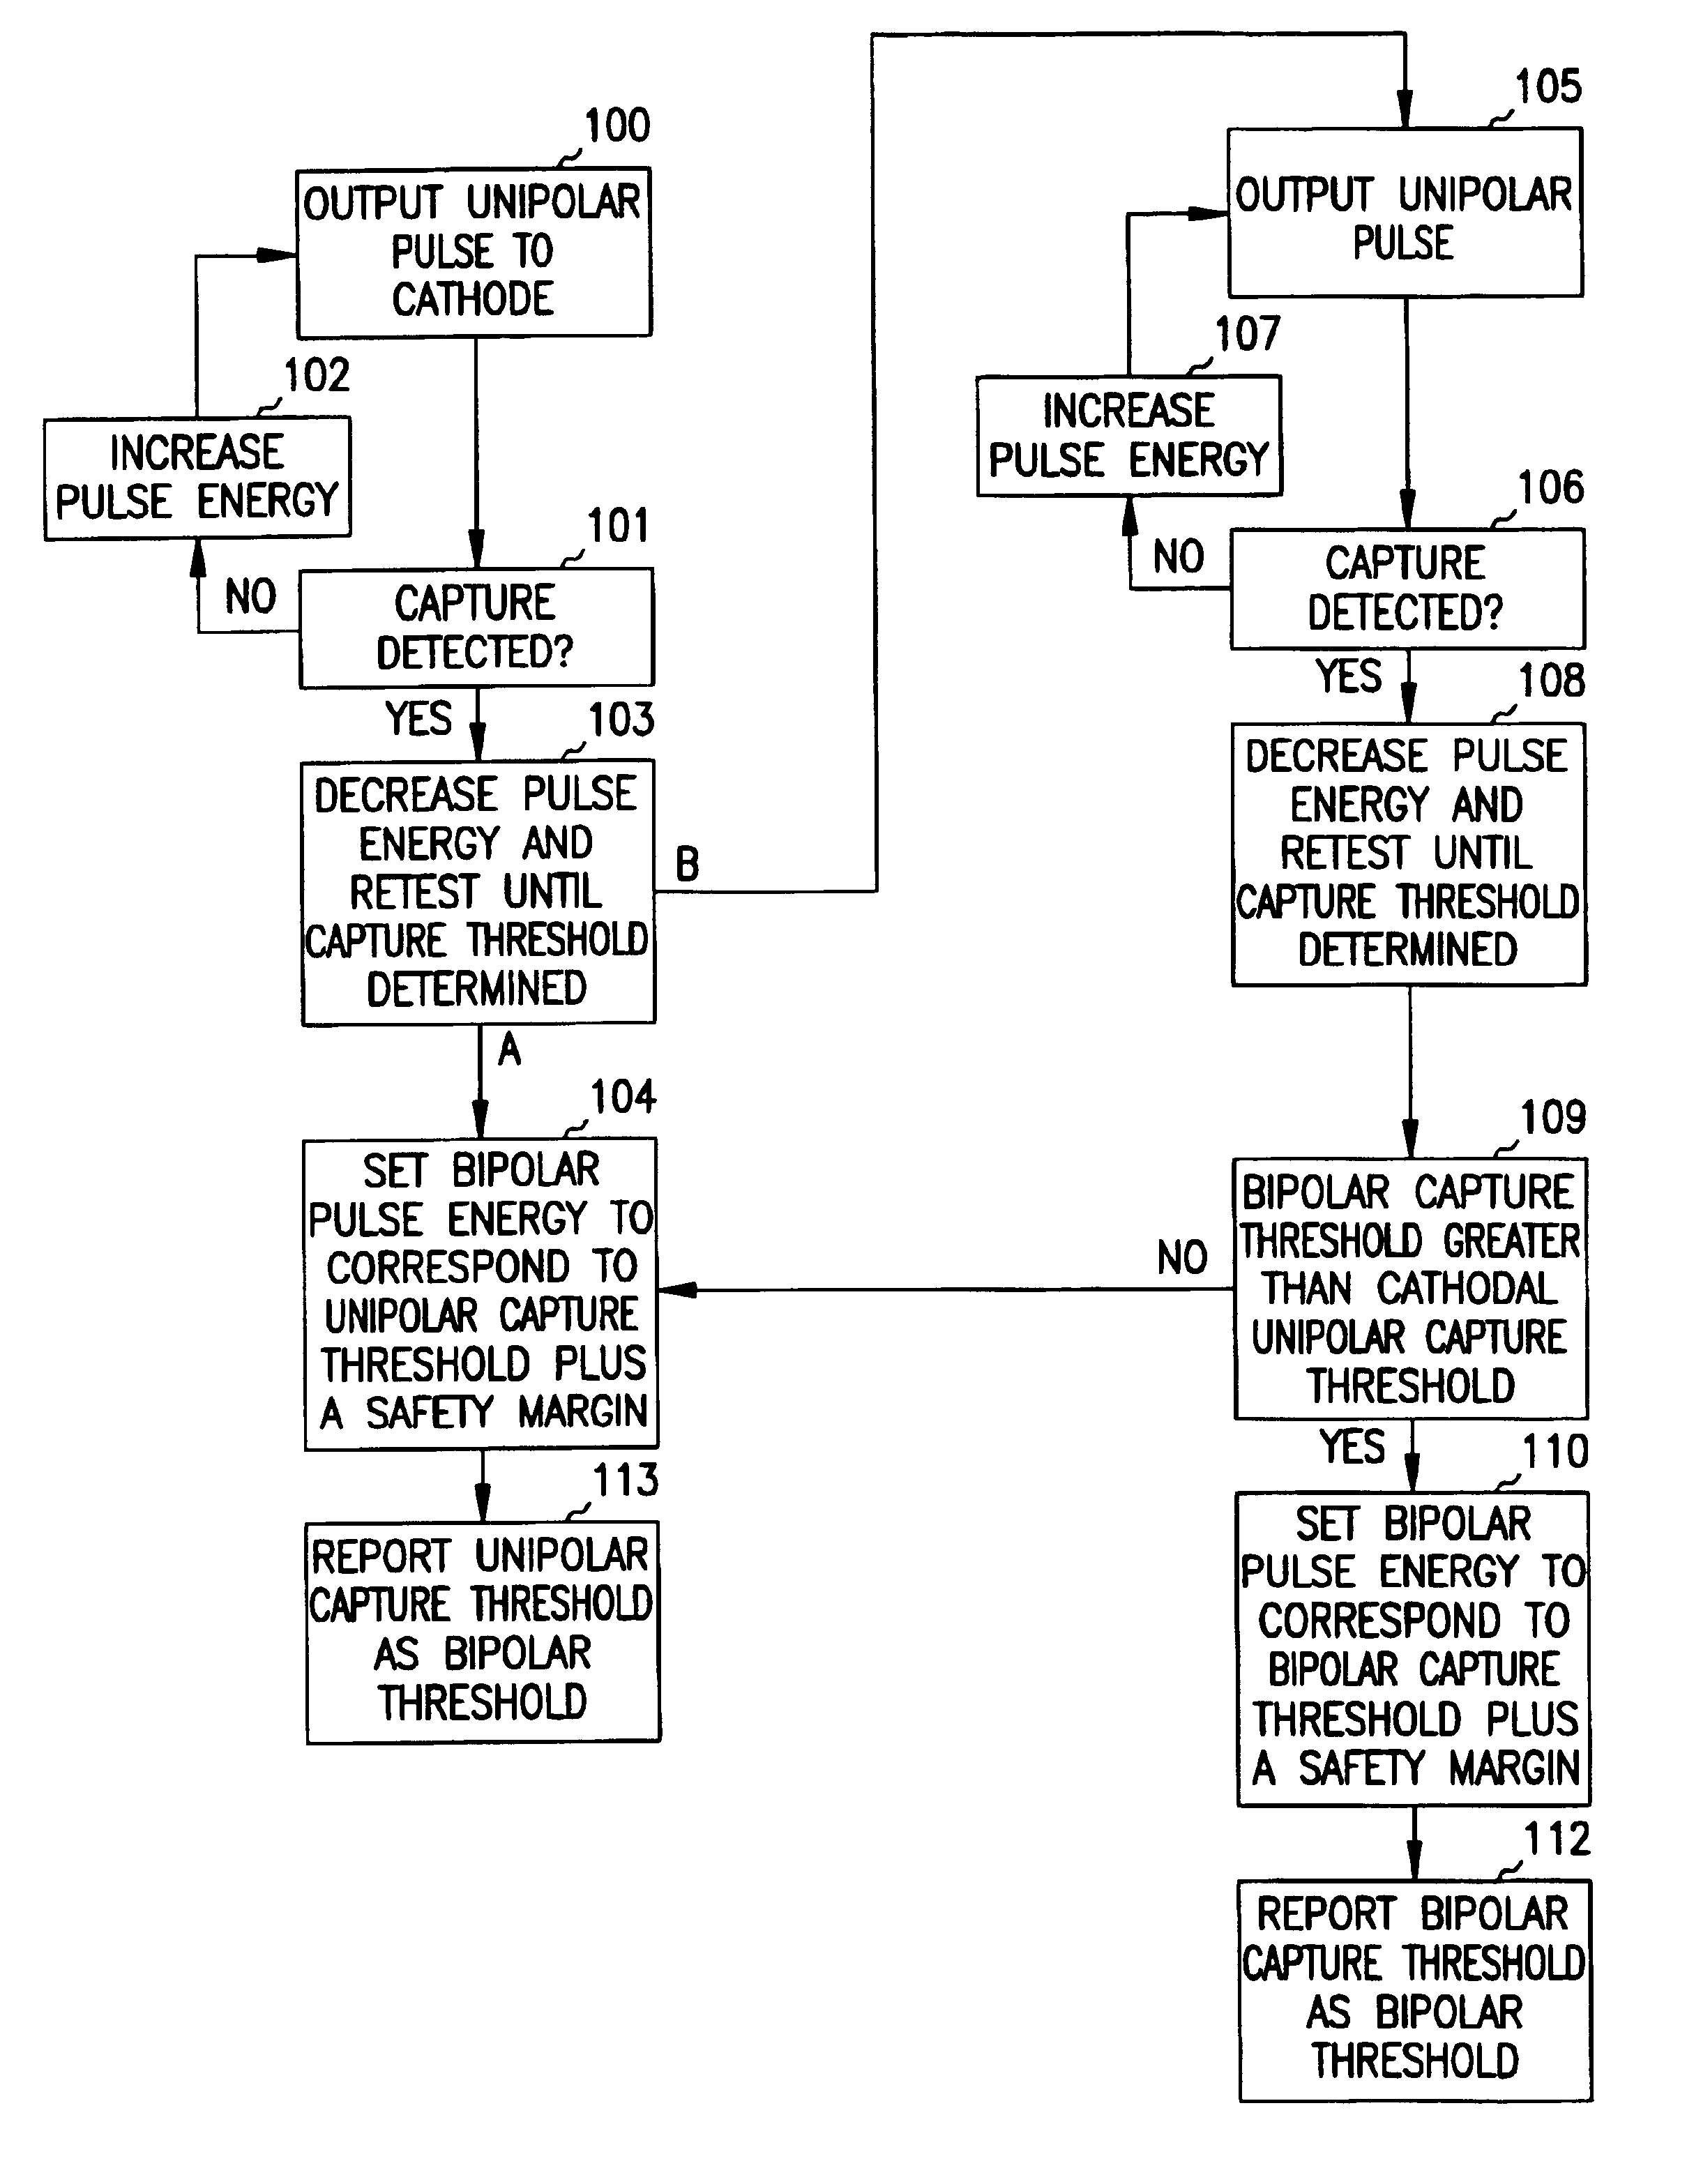 Apparatus and method for testing and adjusting a bipolar stimulation configuration